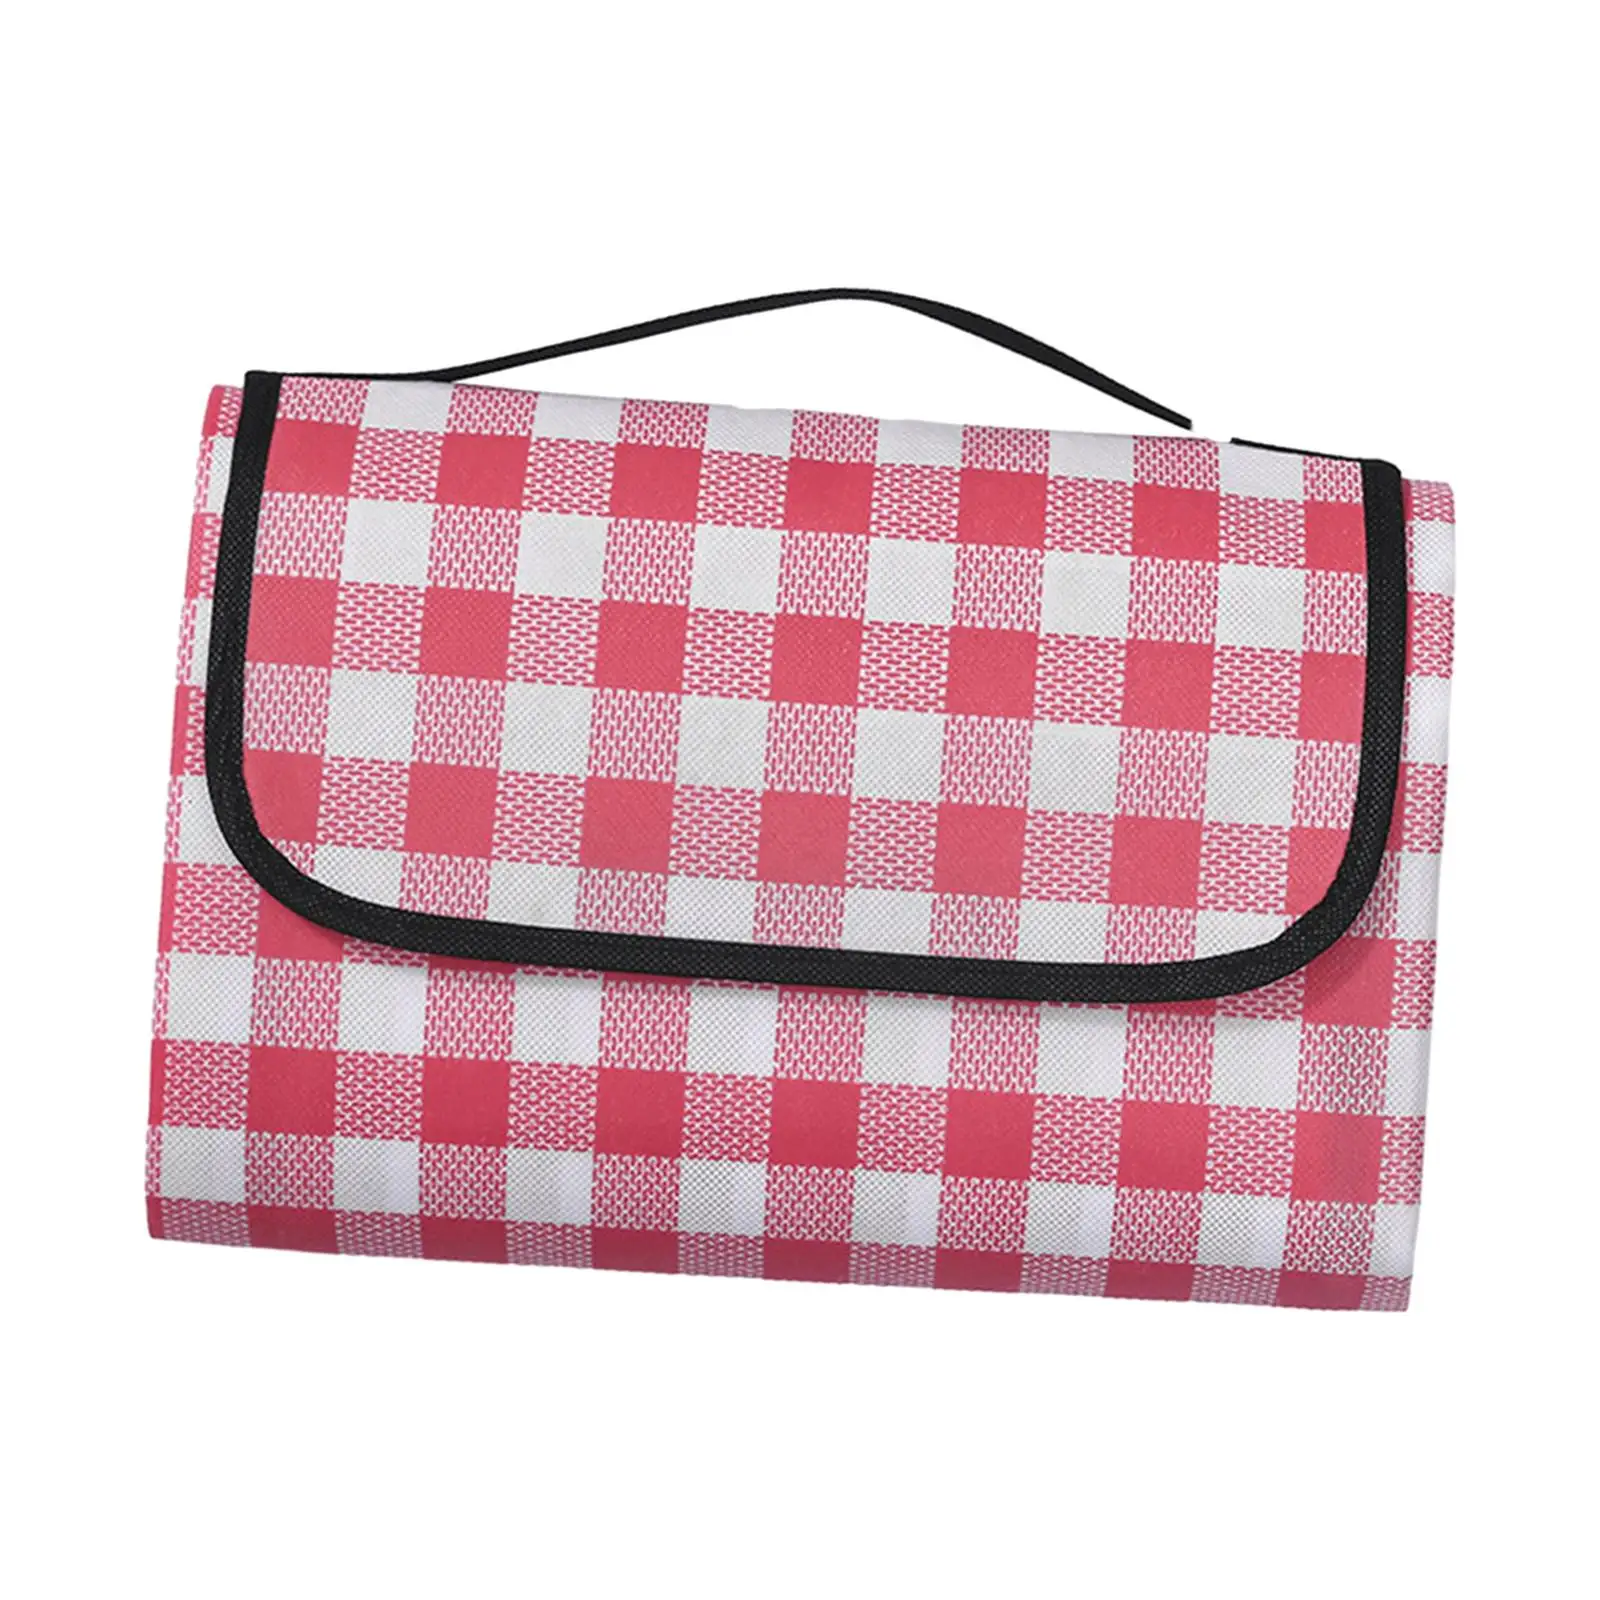 Picnic Blanket Water Resistant Fashion Beach Mat for Barbecue Summer